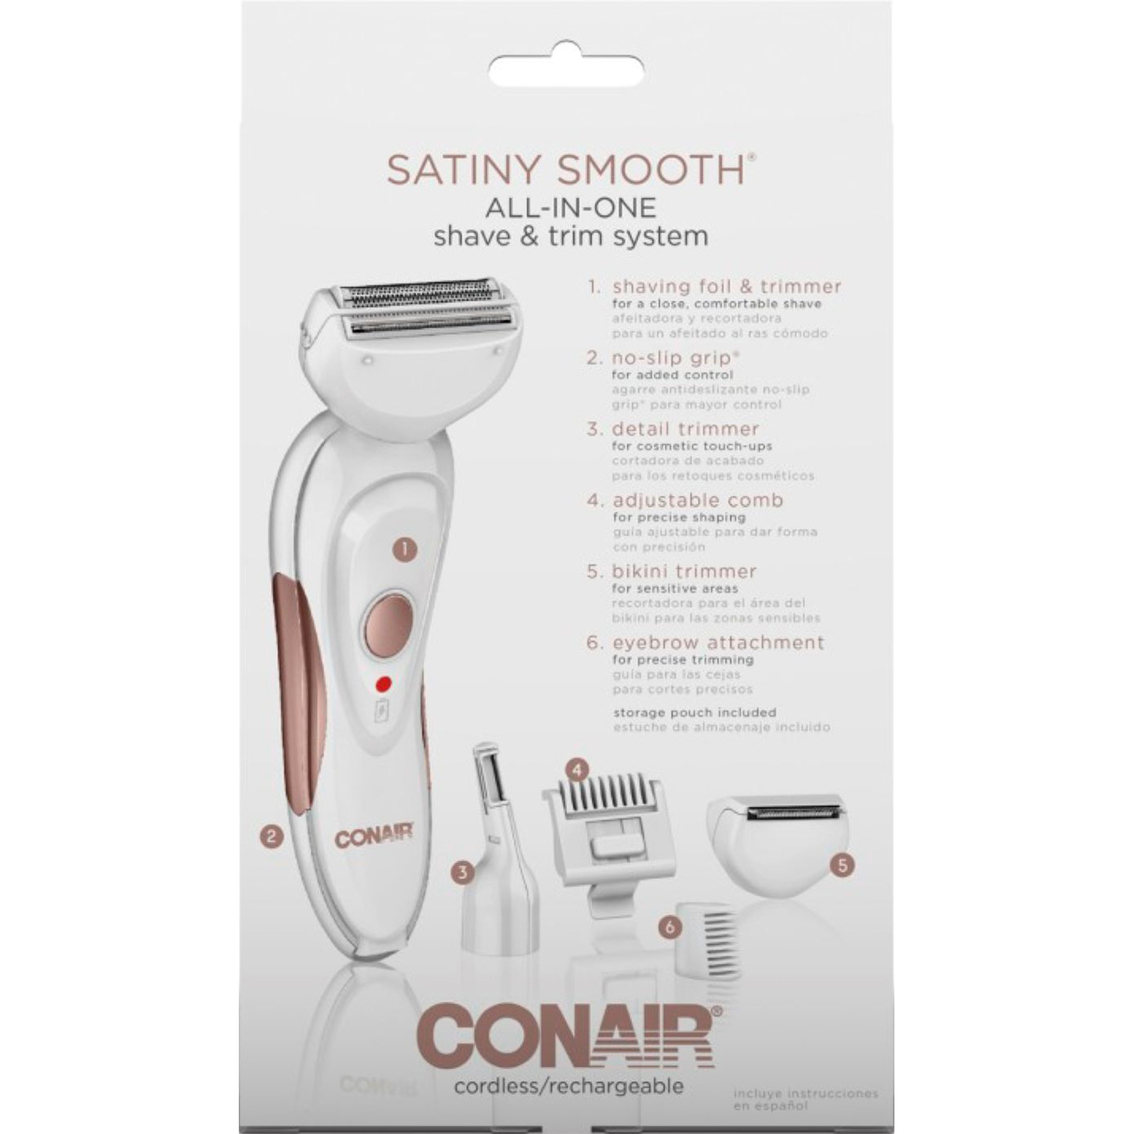 Conair All in One Shave and Trim Cordless and Rechargeable System - Image 10 of 10